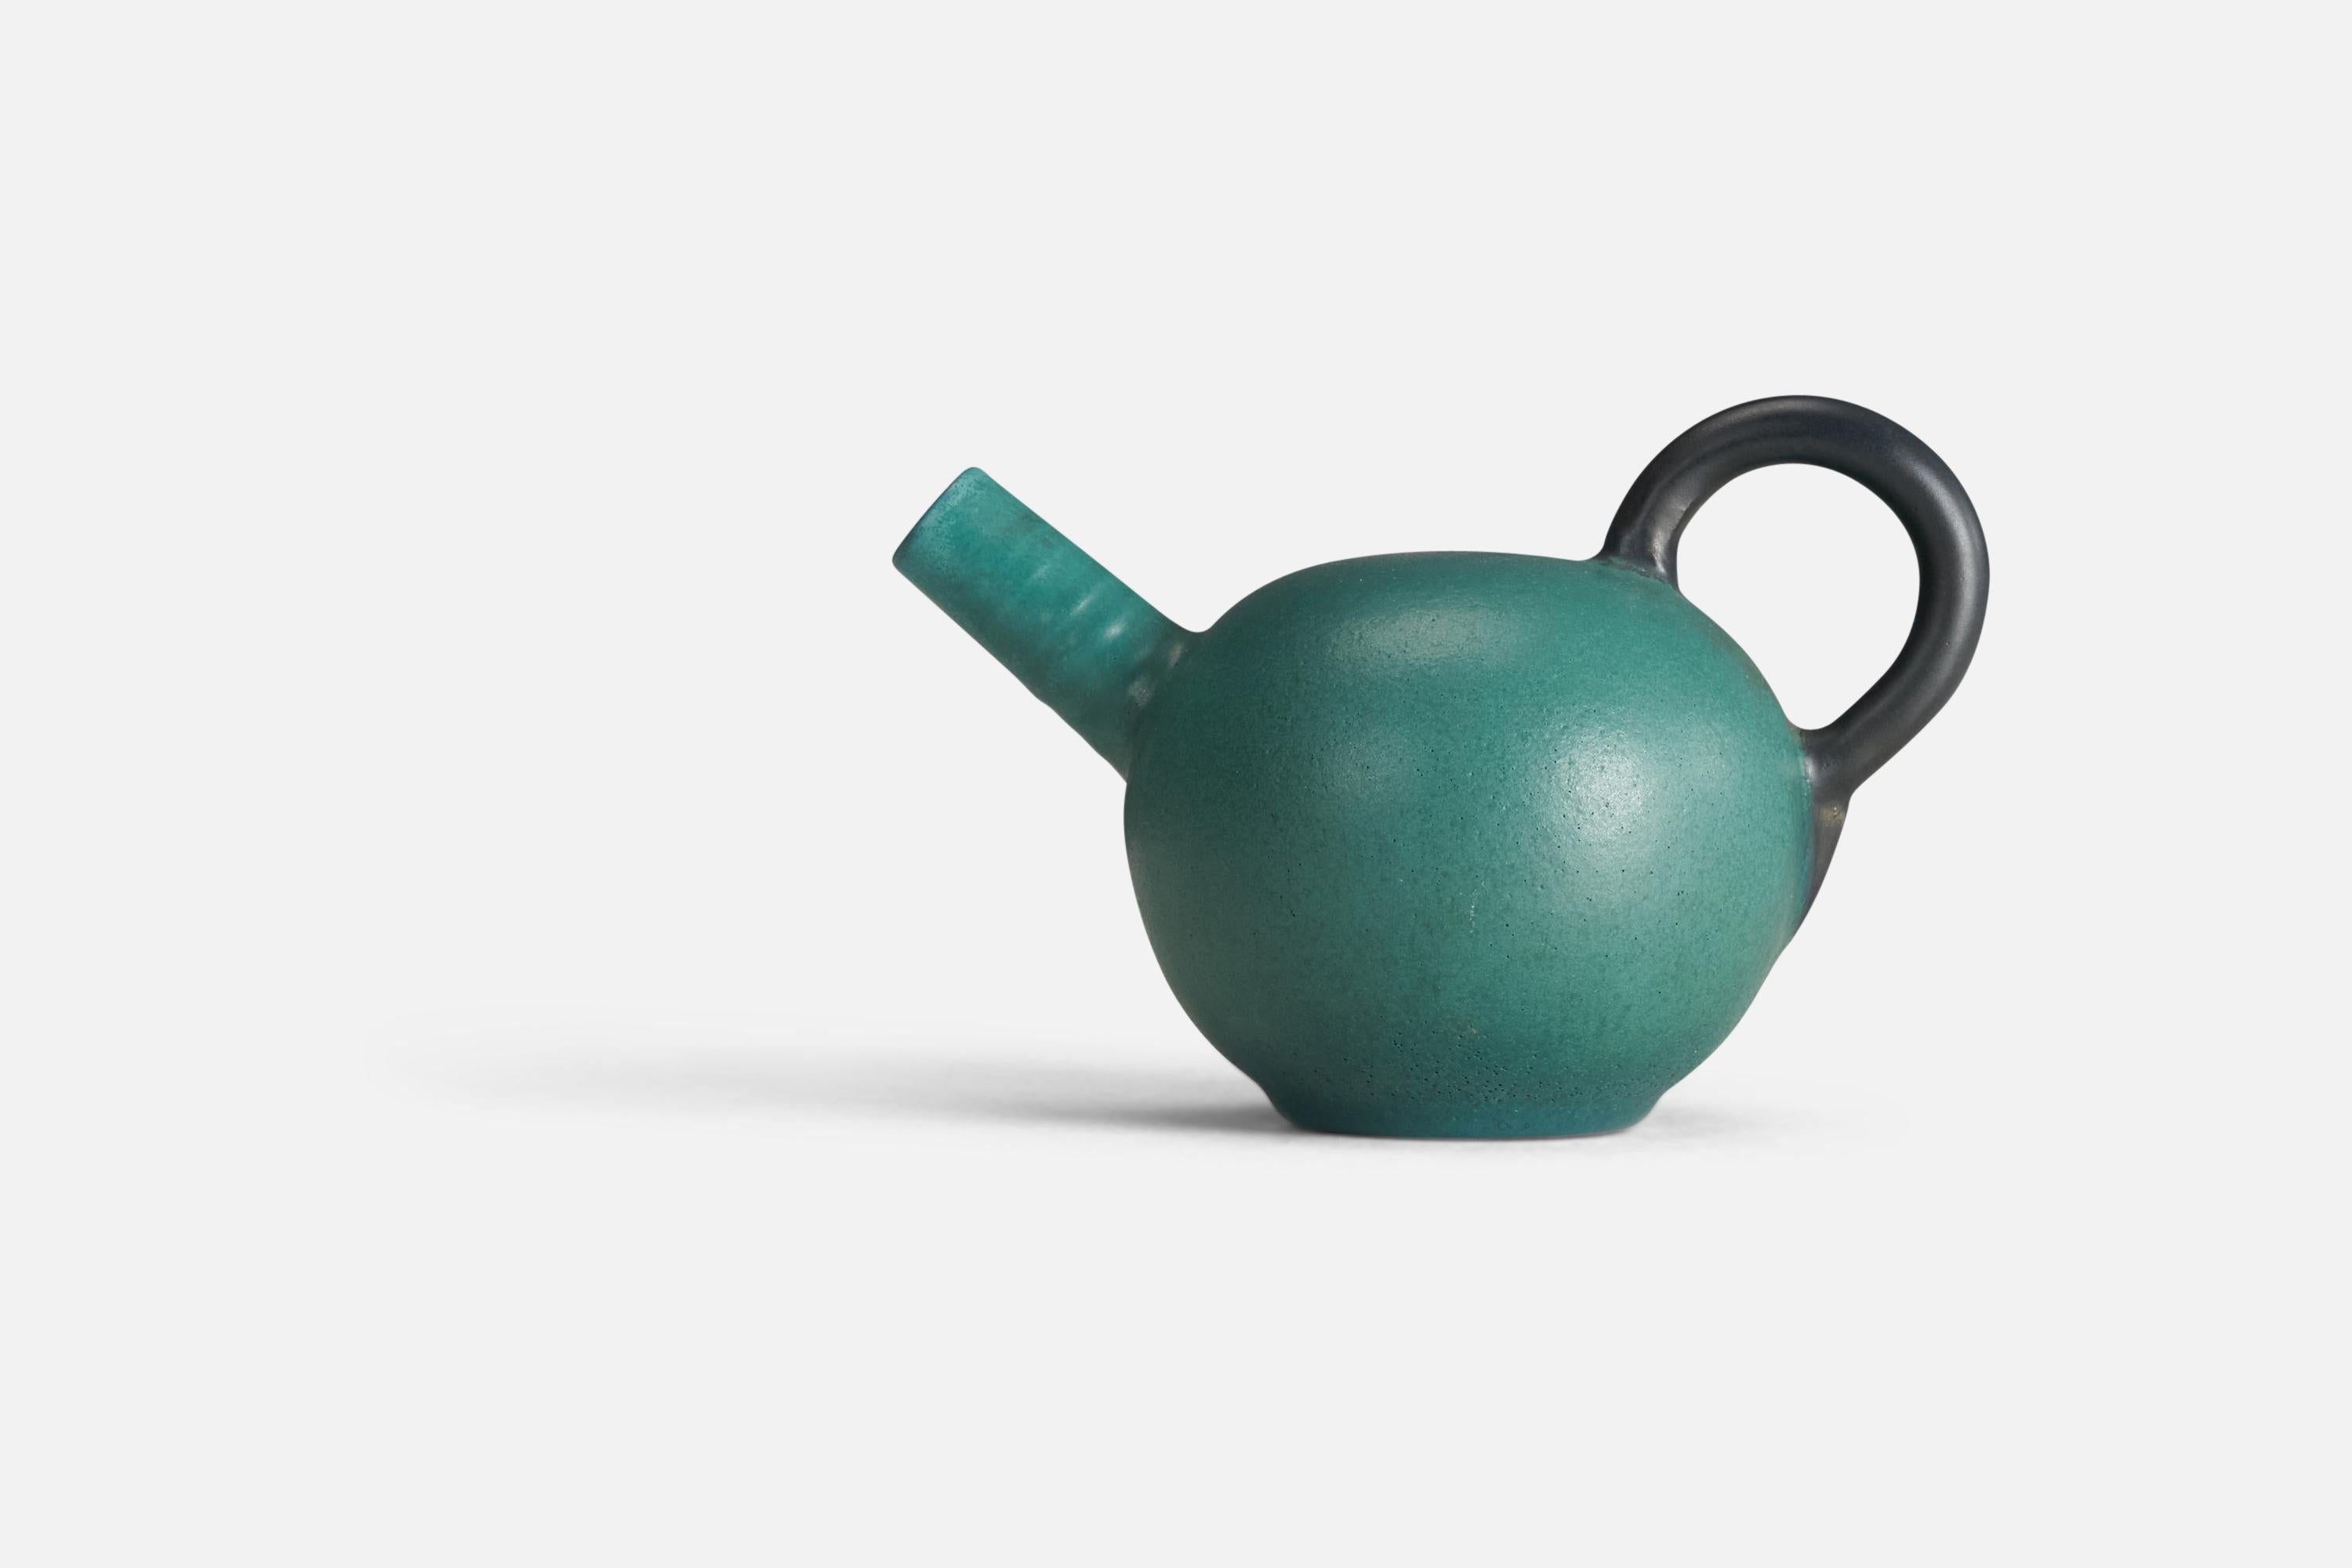 A stoneware kettle designed by Andersson & Johansson and produced in Höganäs, Sweden, 1940s.